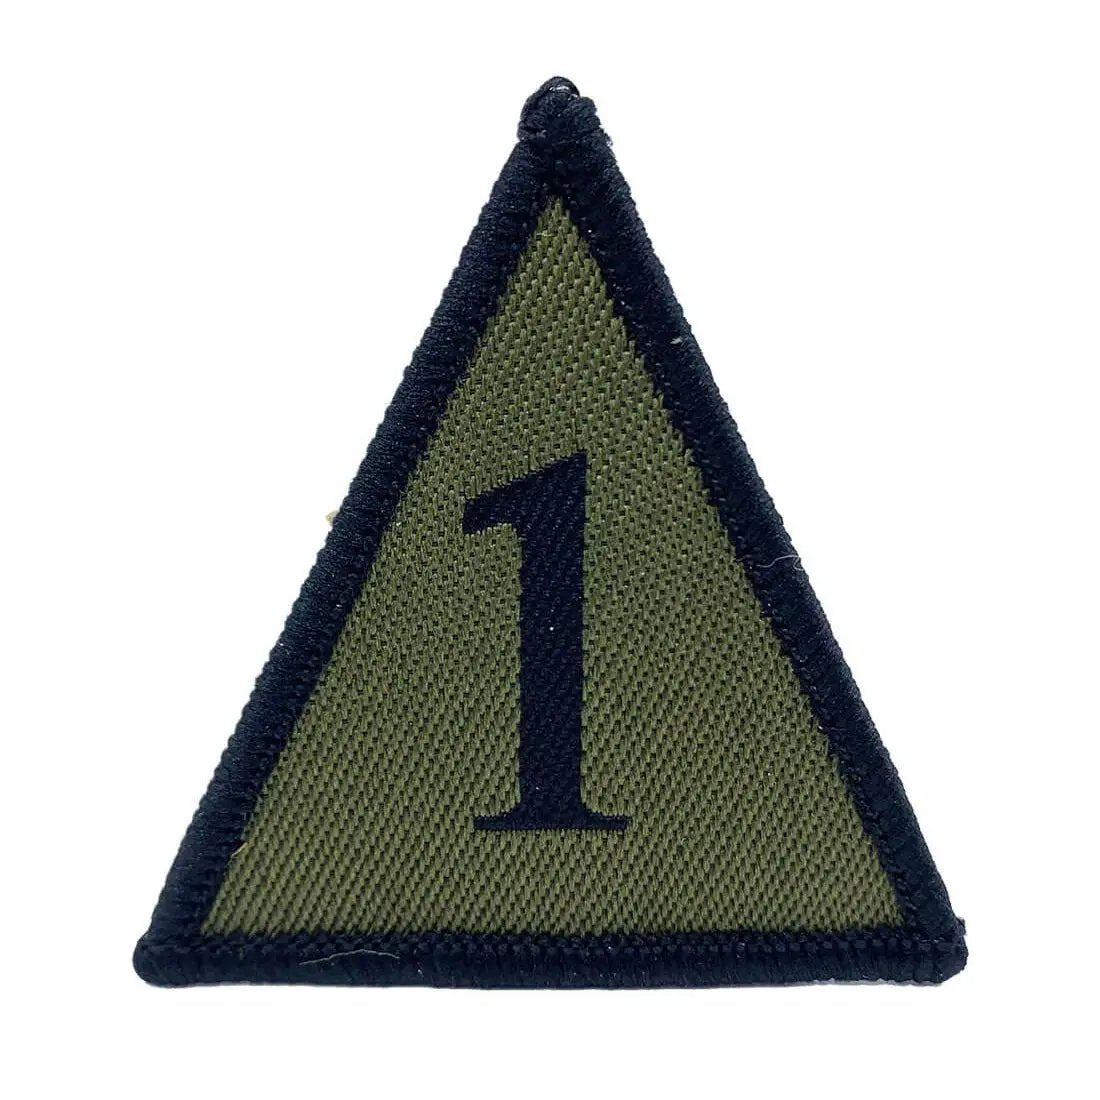 1 Armoured Brigade TRF - Iron or Sewn On Patch - John Bull Clothing